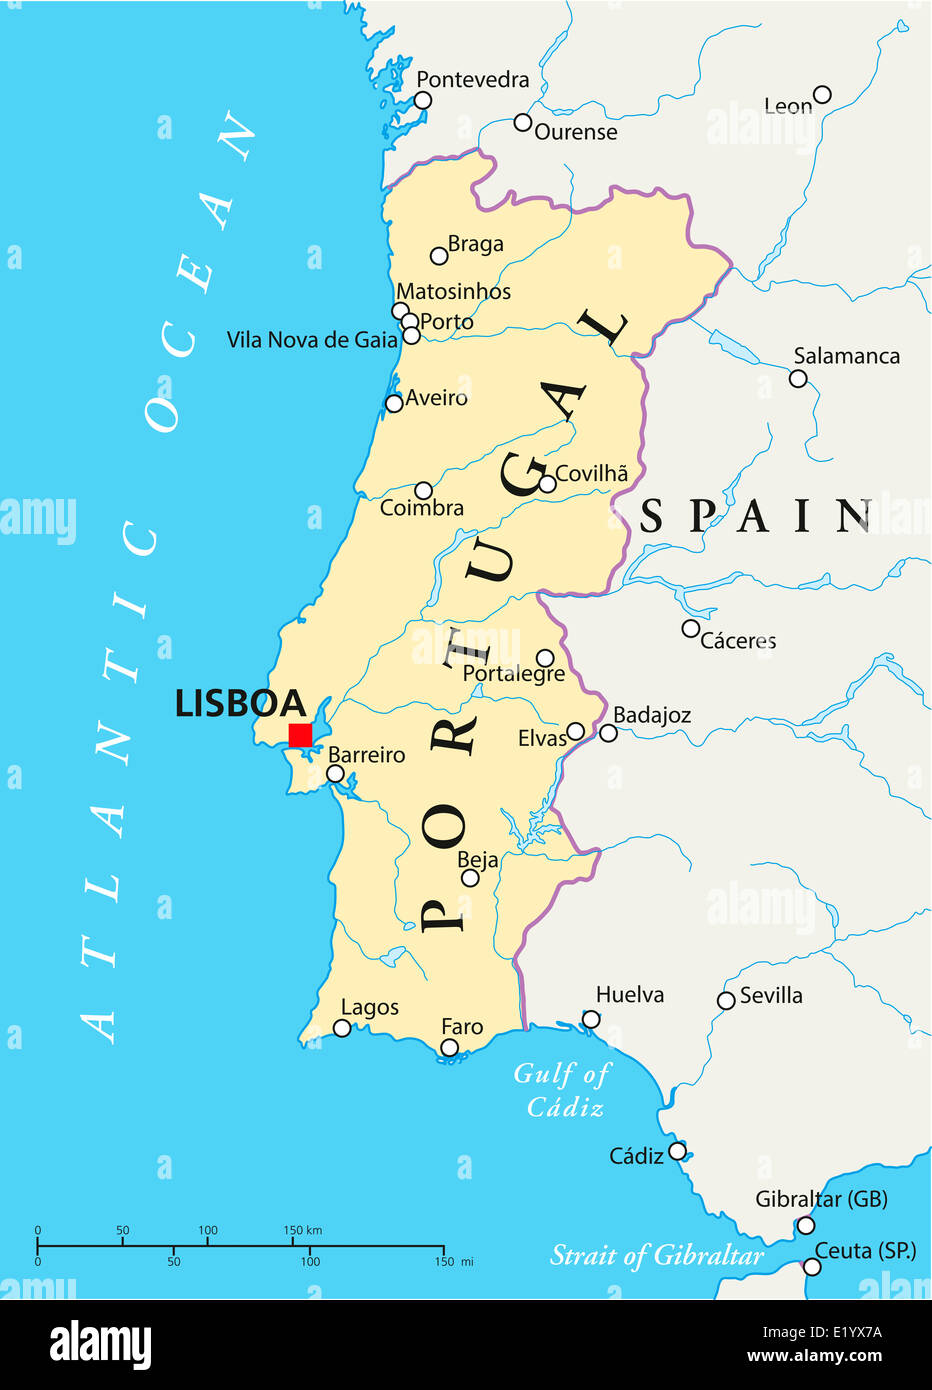 Portugal Political Map With Capital Lisbon National Borders Most Important E1YX7A 